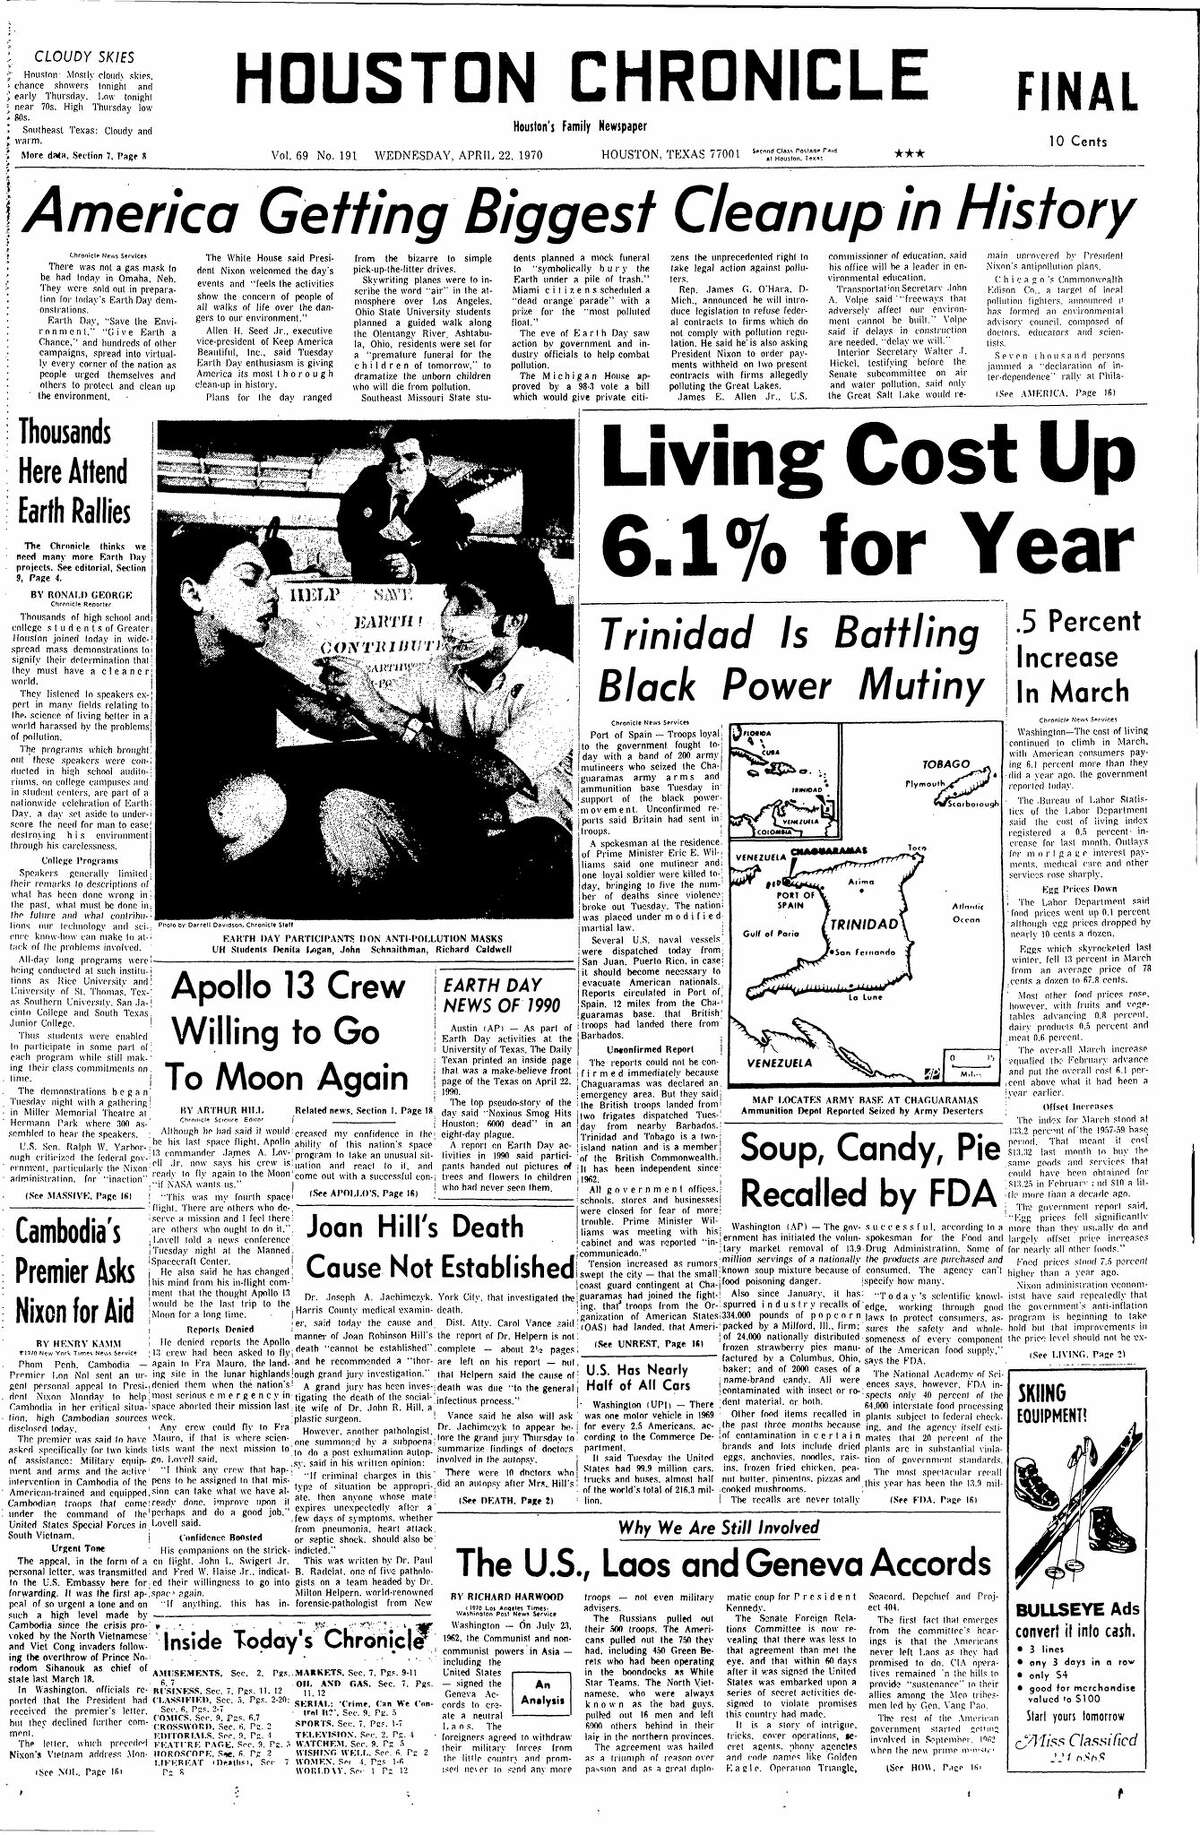 Houston Chronicle front page for April 22, 1970.